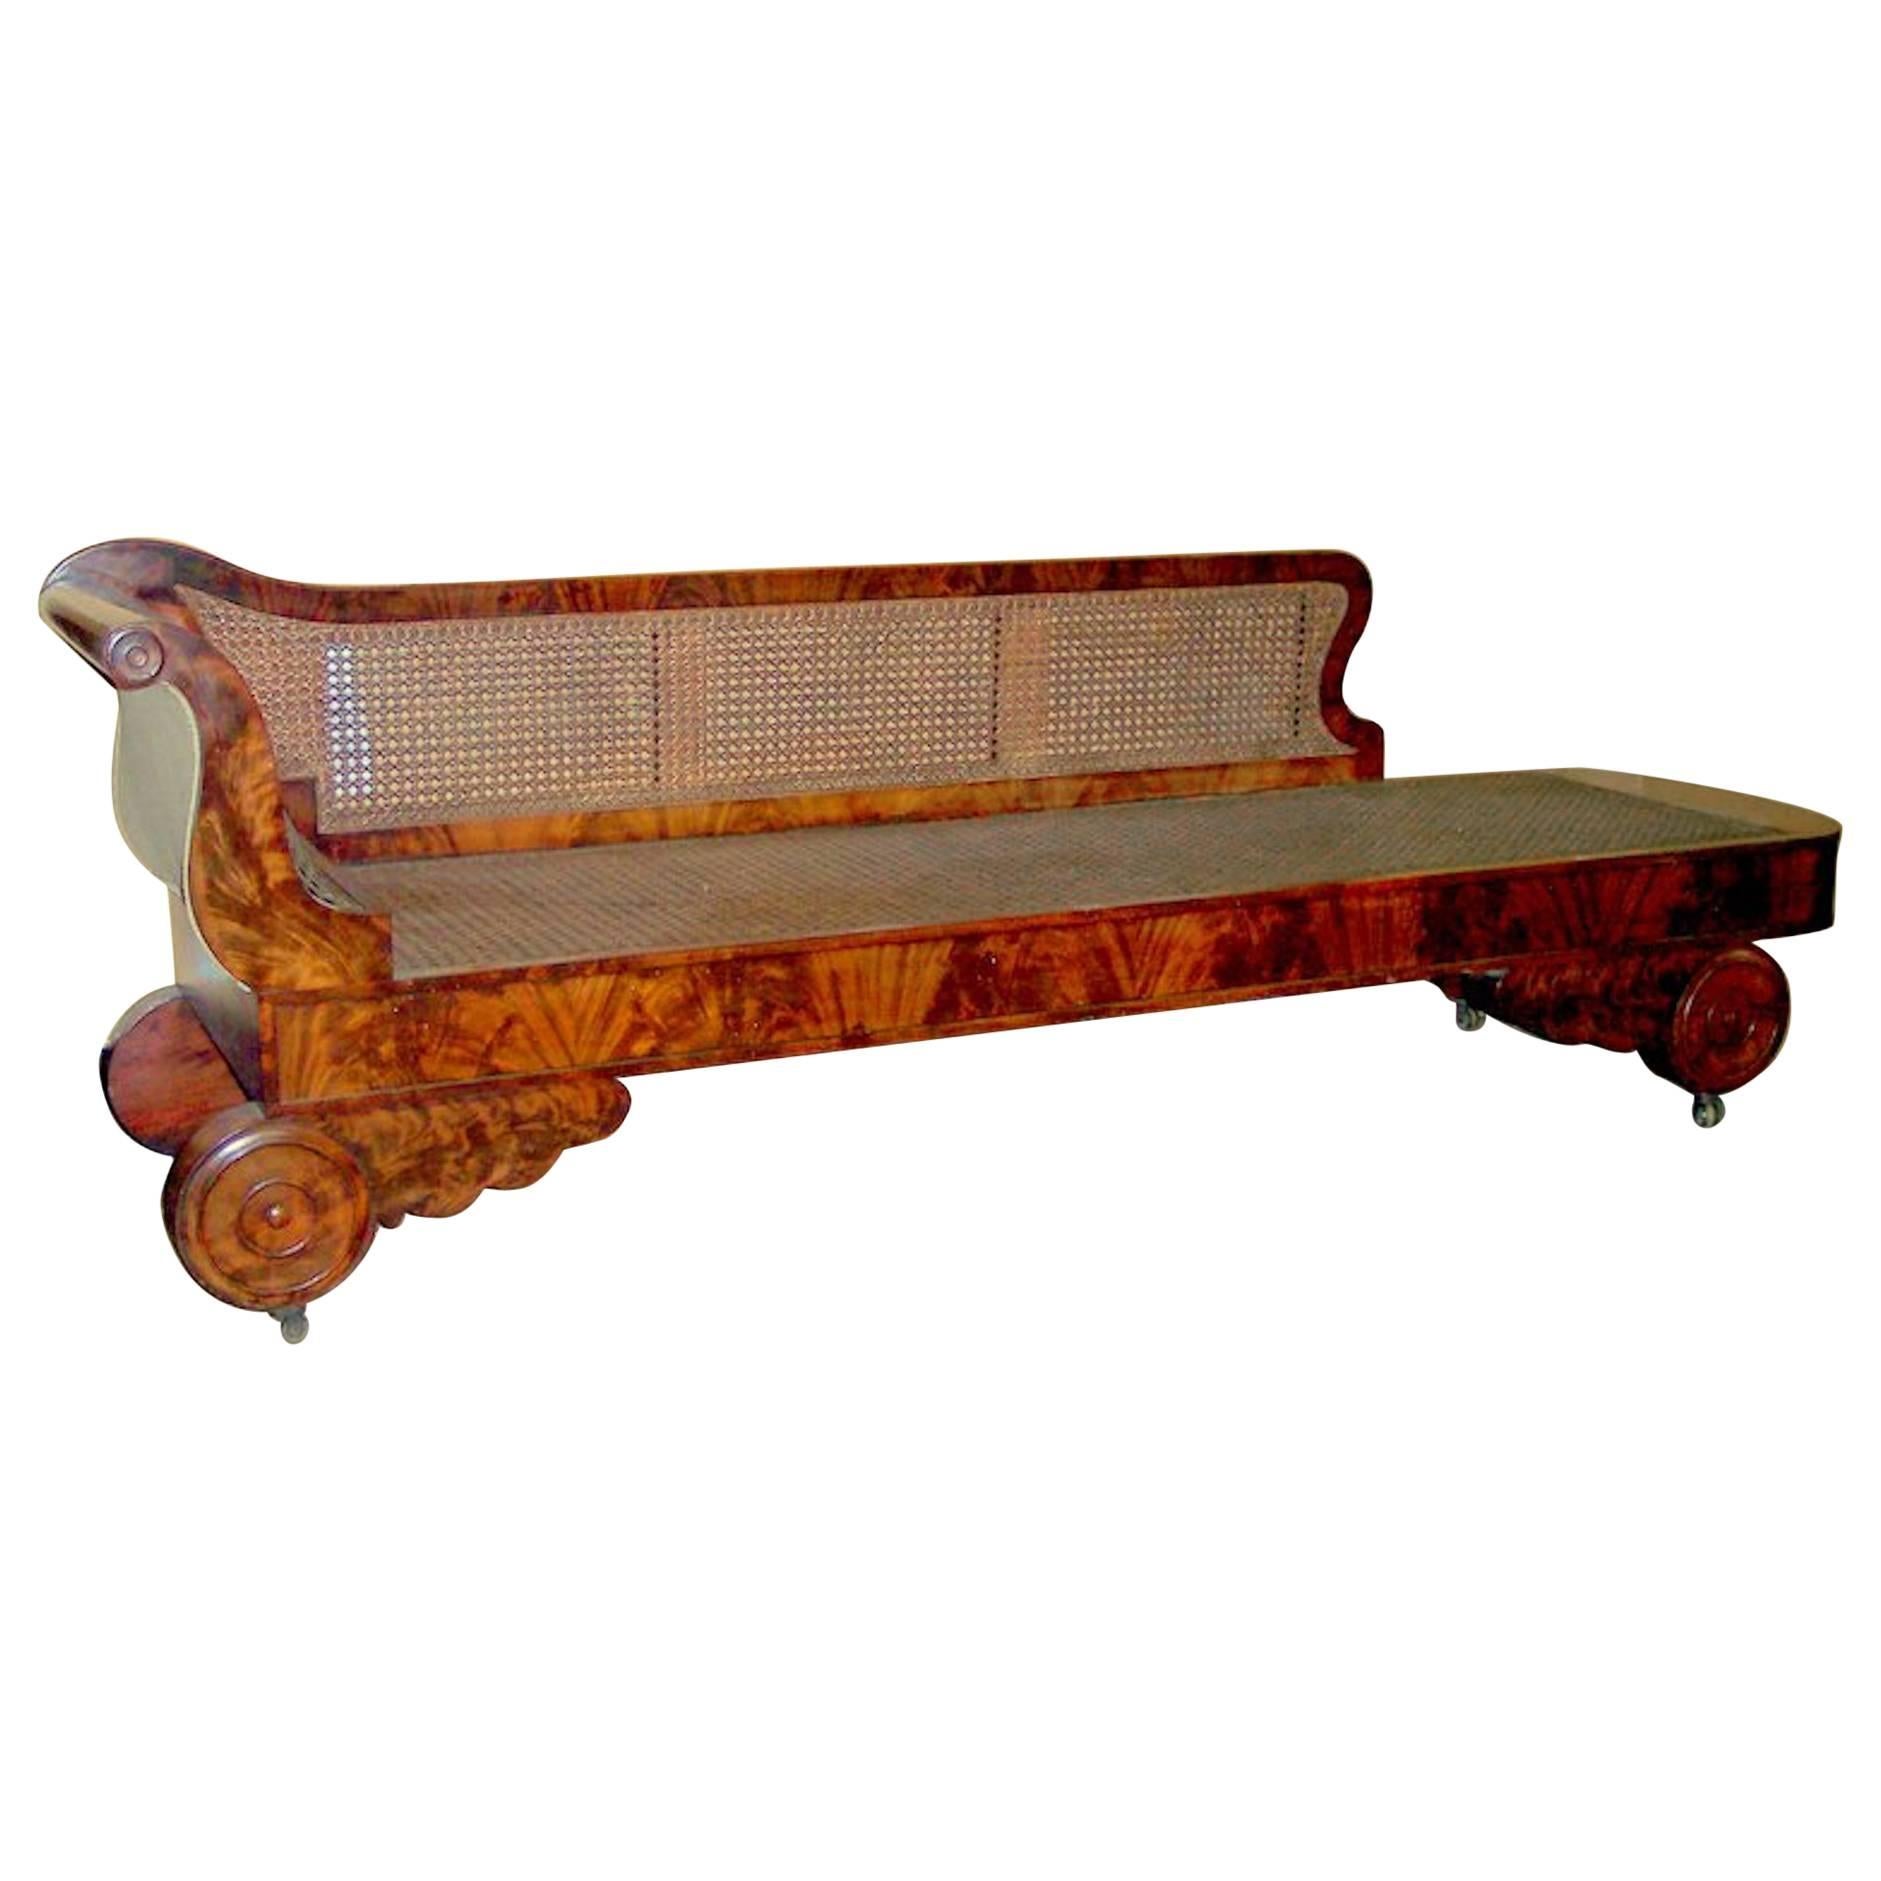 Antique American Flame Mahogany and Cane Empire Period Recamier or Chaise Longue For Sale